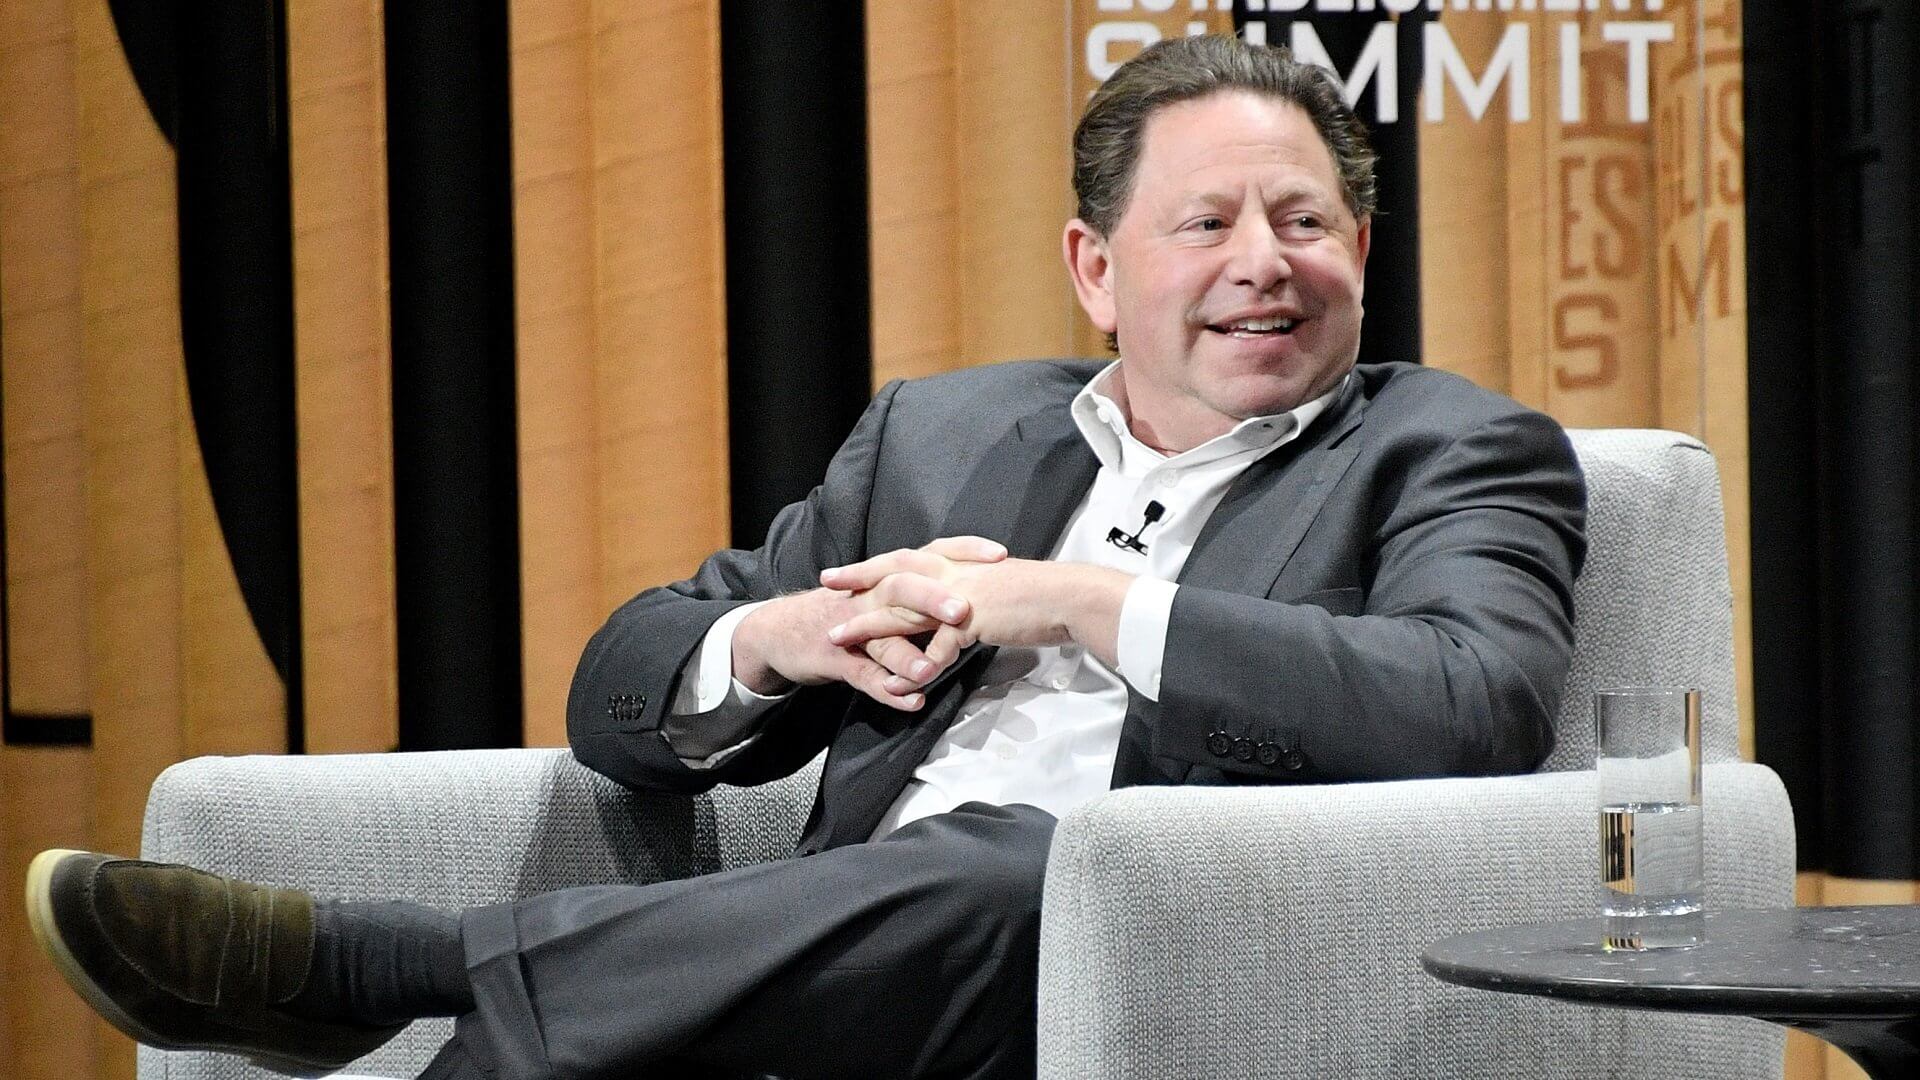 Bobby Kotick, CEO of Activision, would take 185 million dollars if the purchase by Microsoft is approved